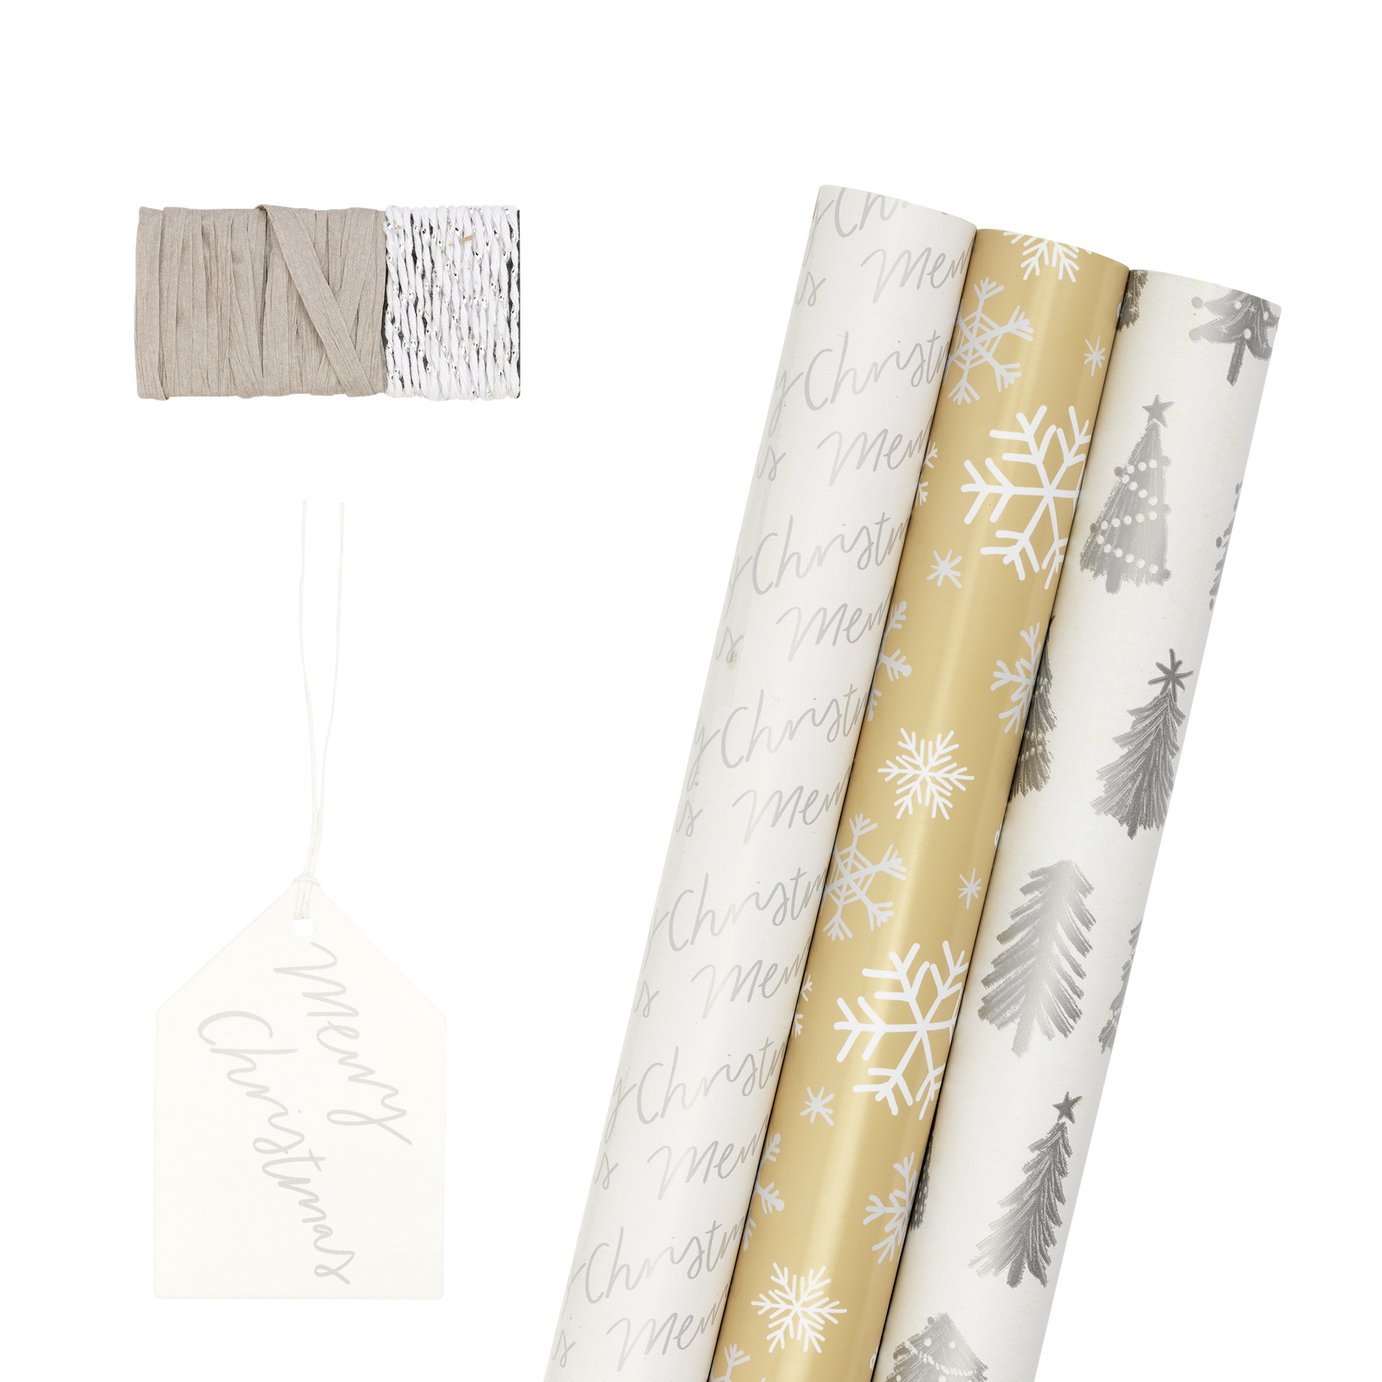 Habitat 3 Roll Trees & Text Wrapping Paper Set